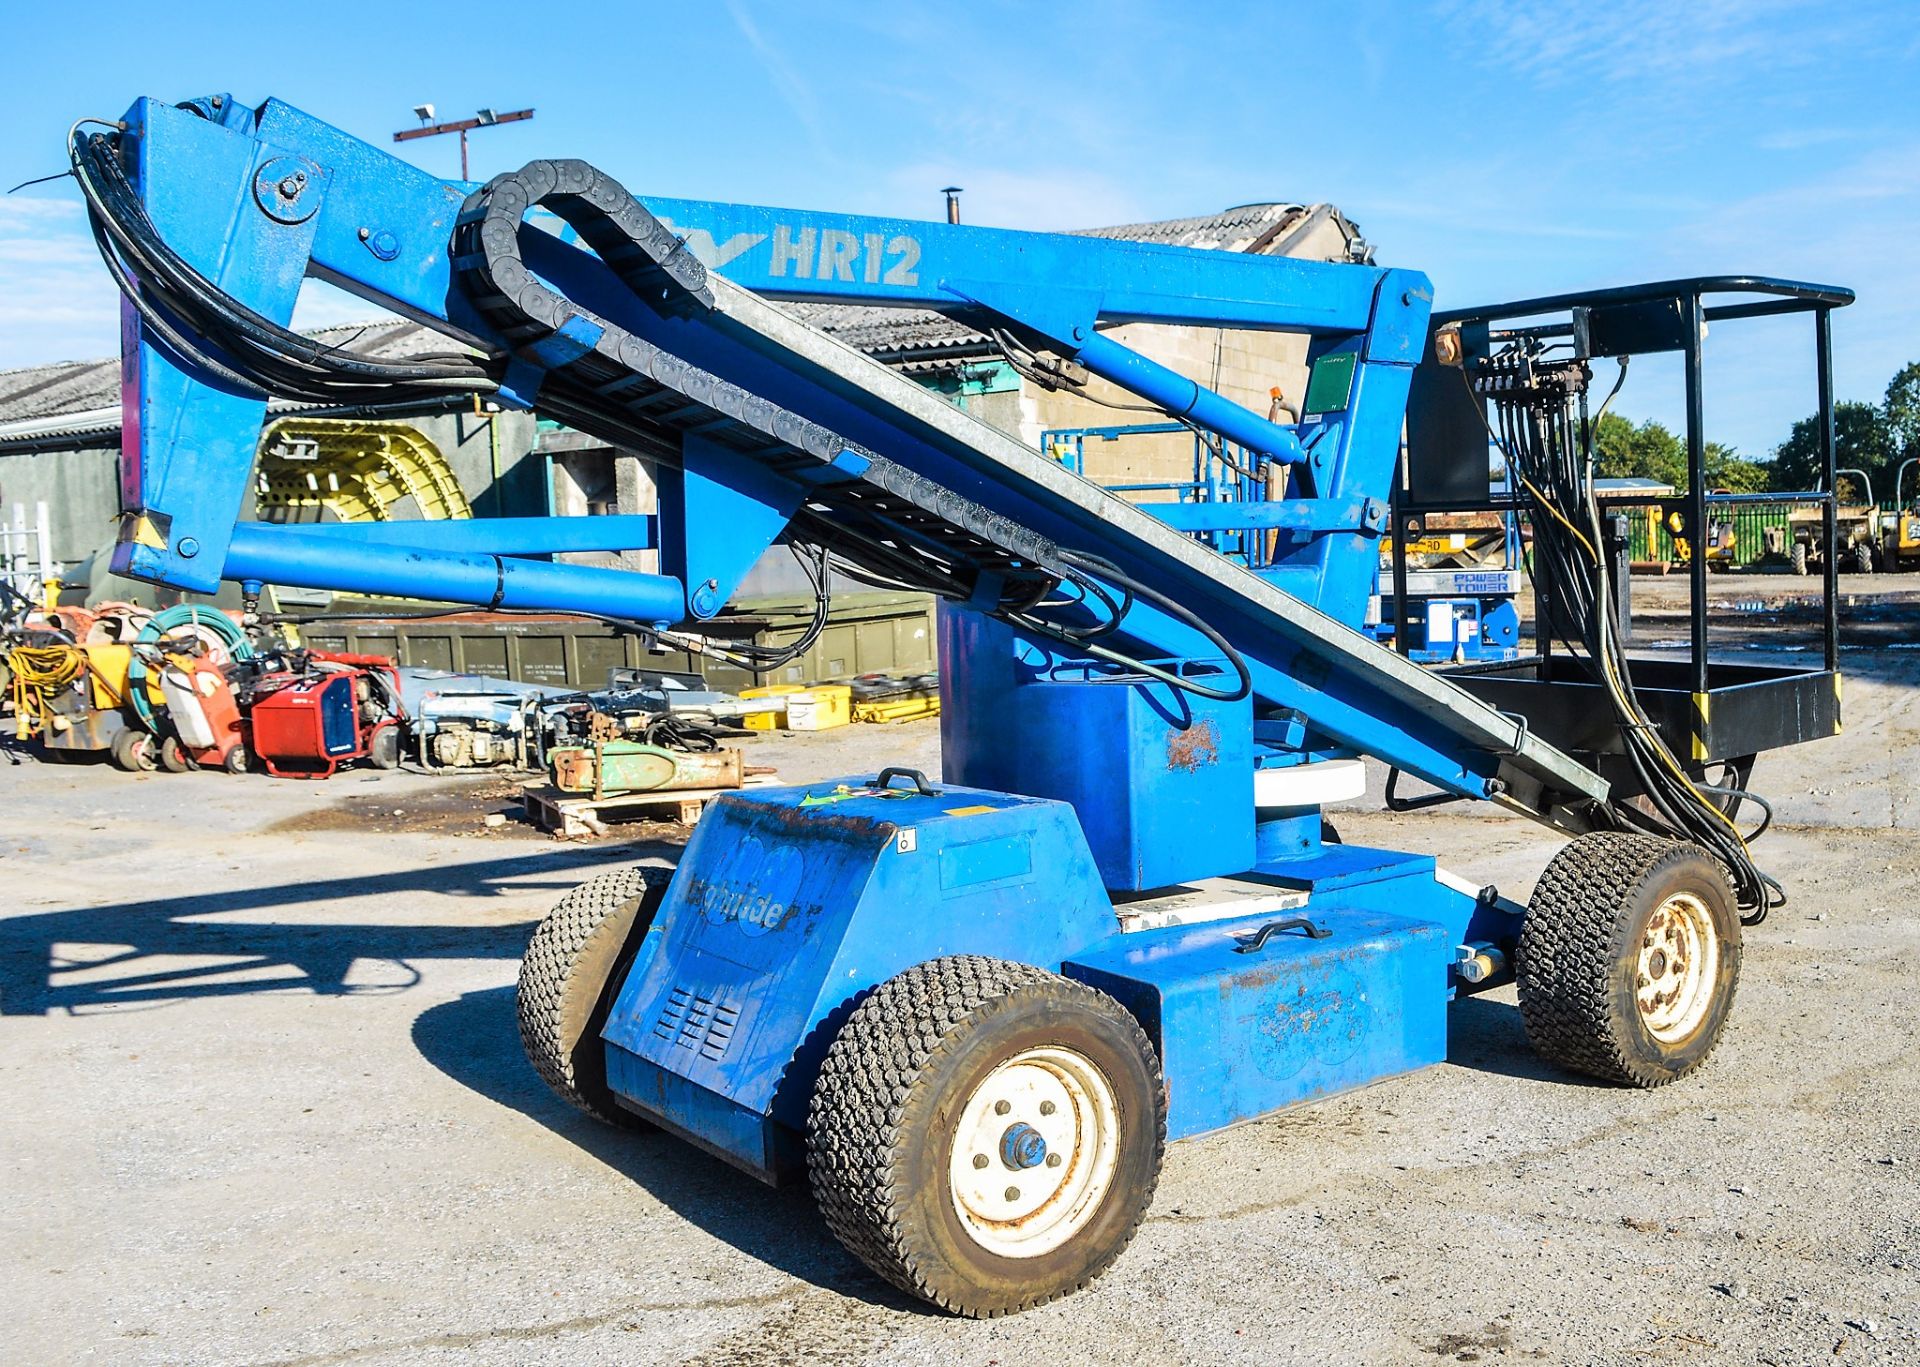 Nifty HR12 12 metre diesel/electric articulated boom access platform Year: 2006 S/N: 14413 HYP055 - Image 4 of 10